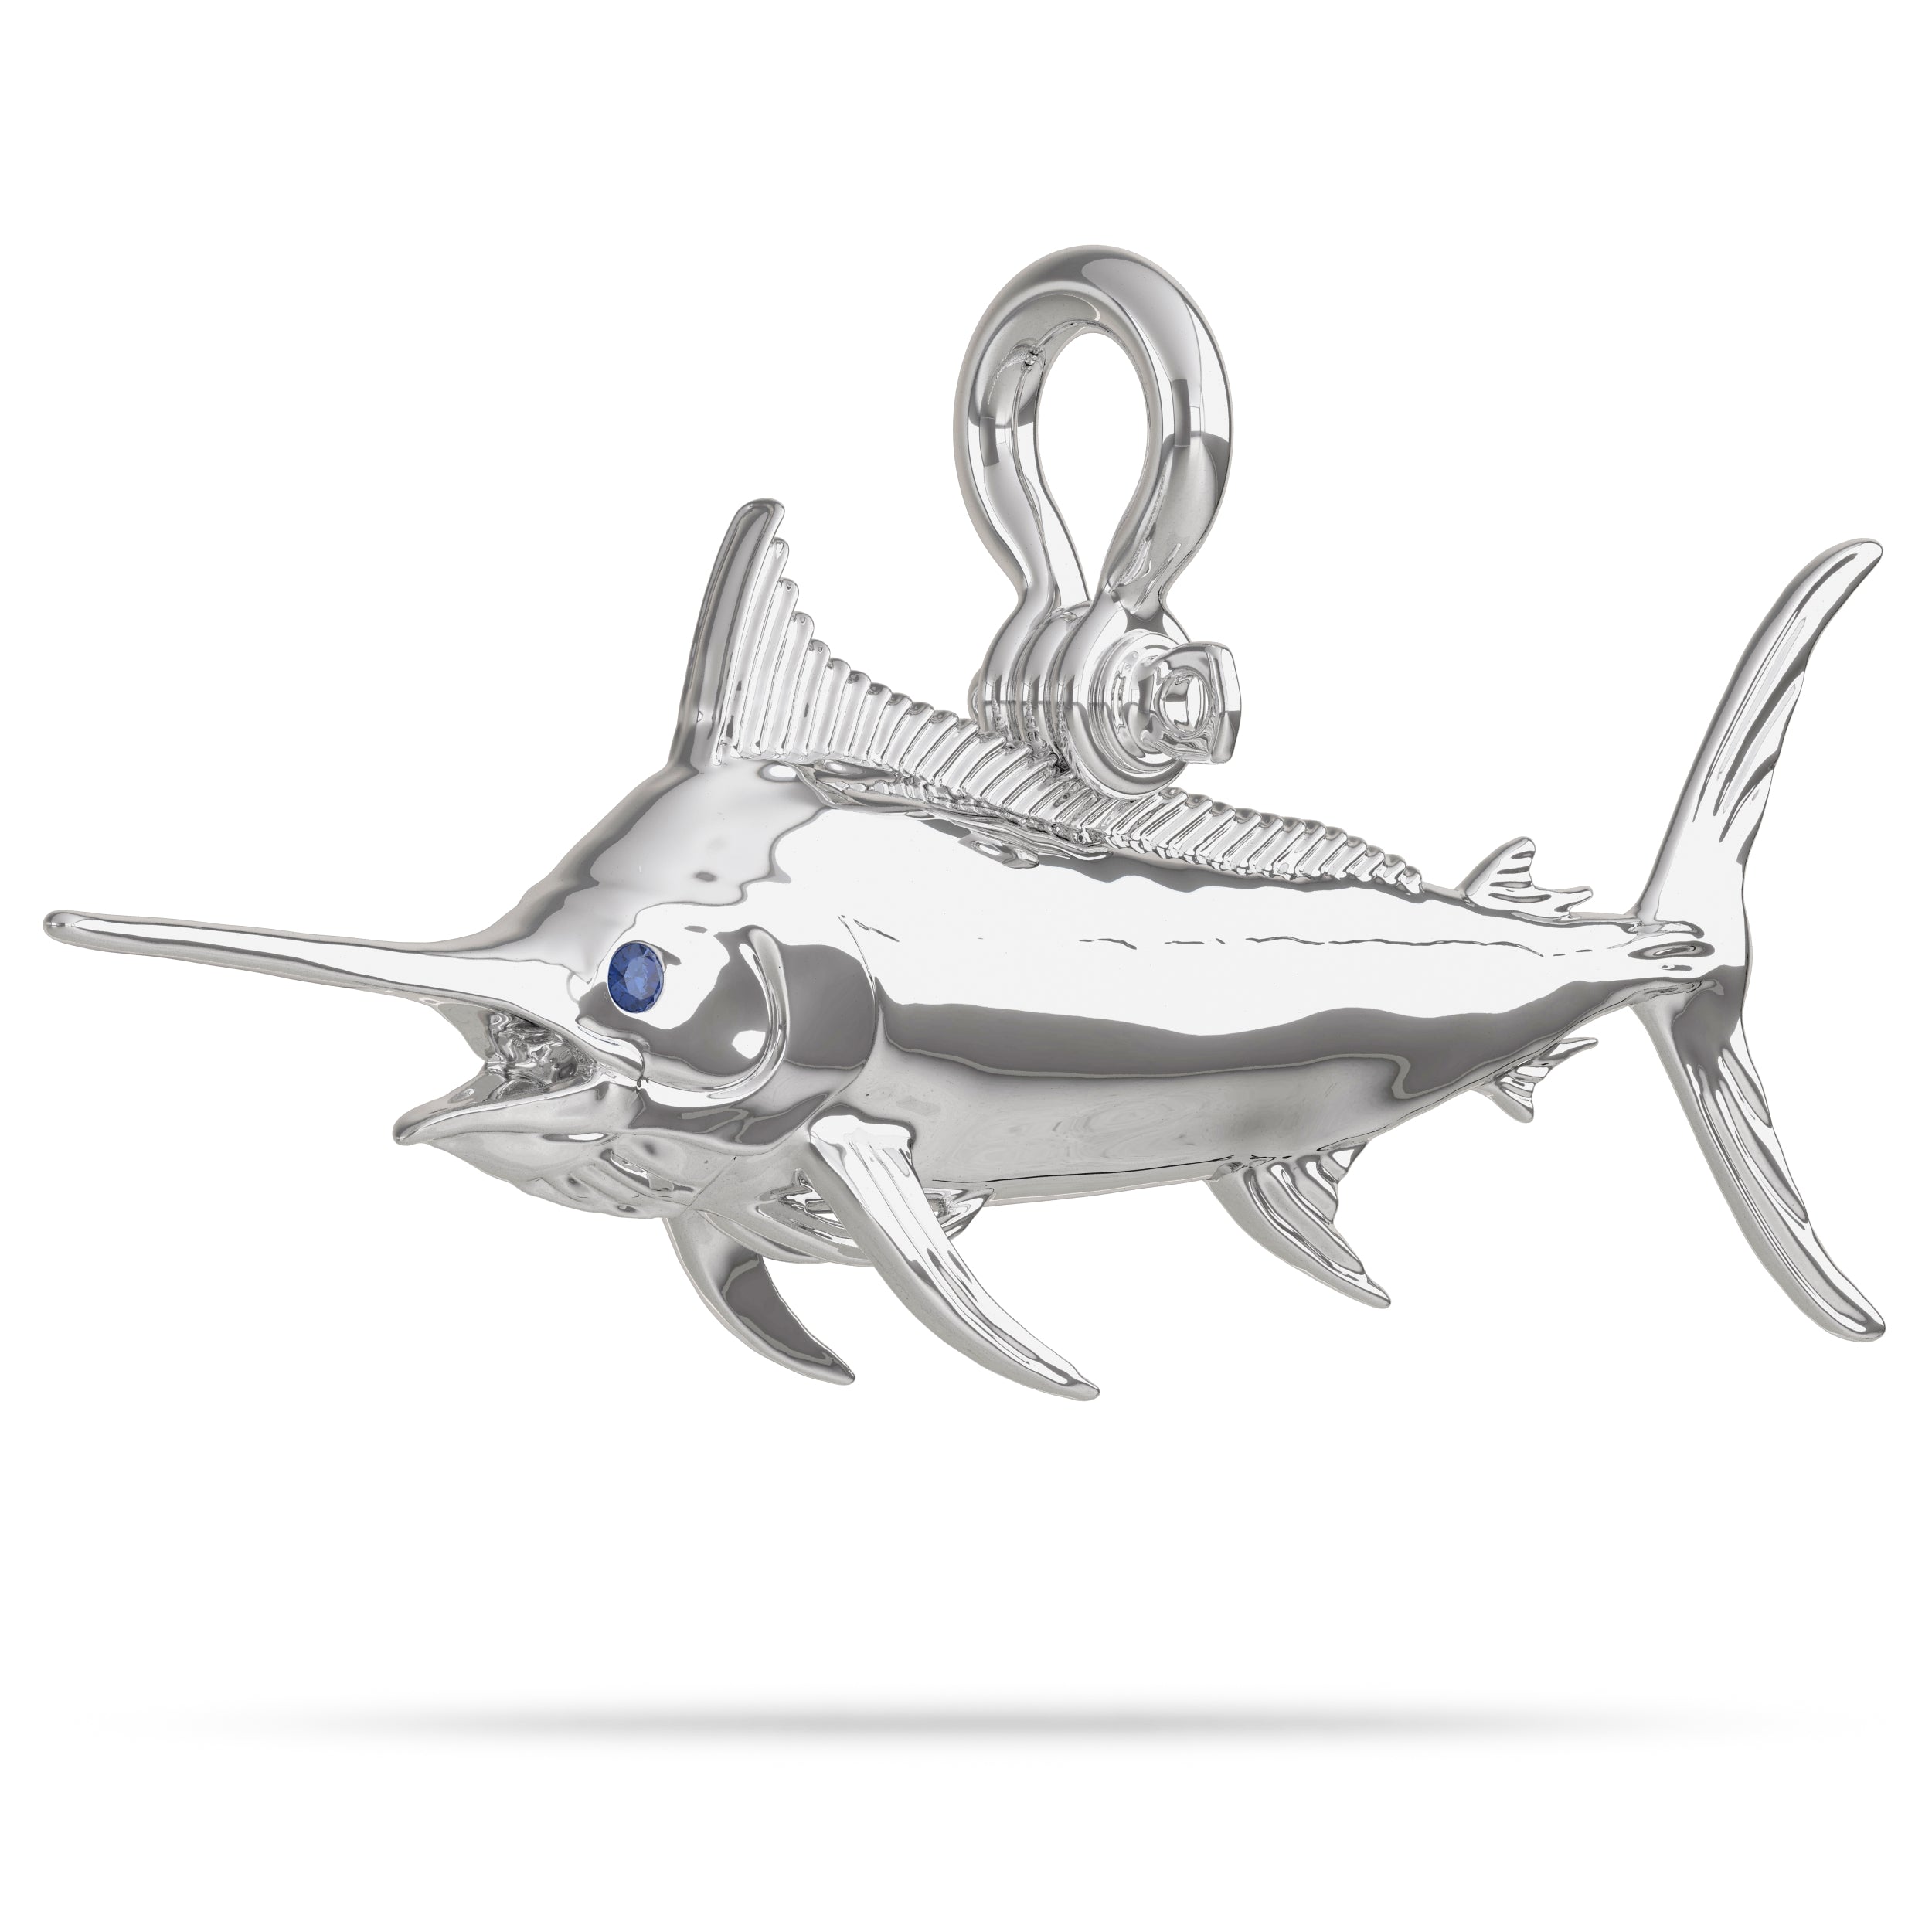 Sterling Silver Pacific Black Marlin Pendant High Polished Mirror Finish With Blue Sapphire Eye with A Mariner Shackle Bail Custom Designed By Nautical Treasure Jewelry In The Florida Keys The largest Fish in the Ocean 